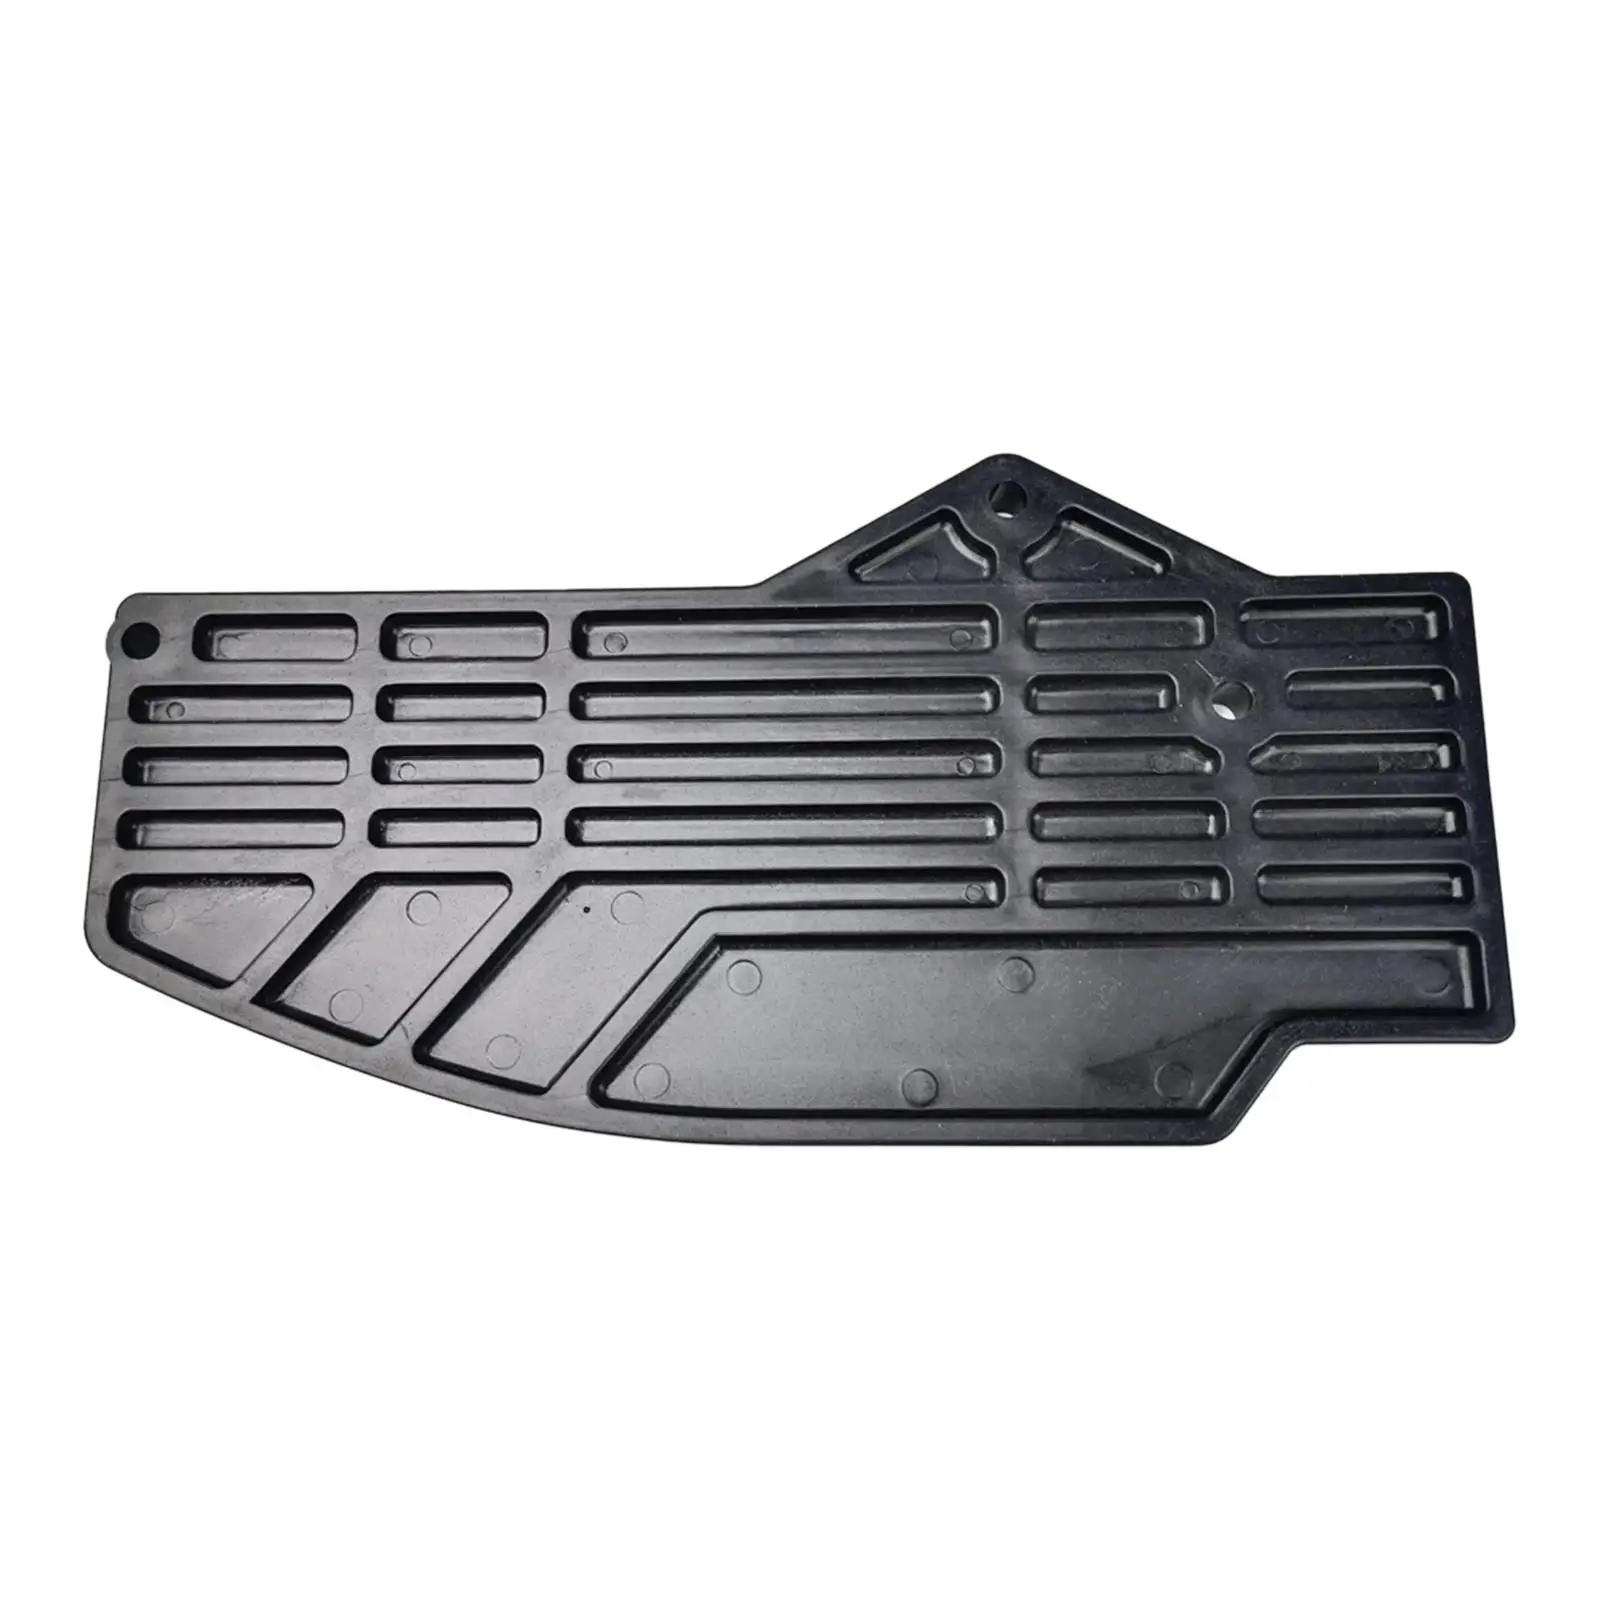 Remote Control Box Spacer Plate 703-48293-10 703-48293 Black Nylon Plate Directly Replace for Yamaha Outboard 703 Accessory